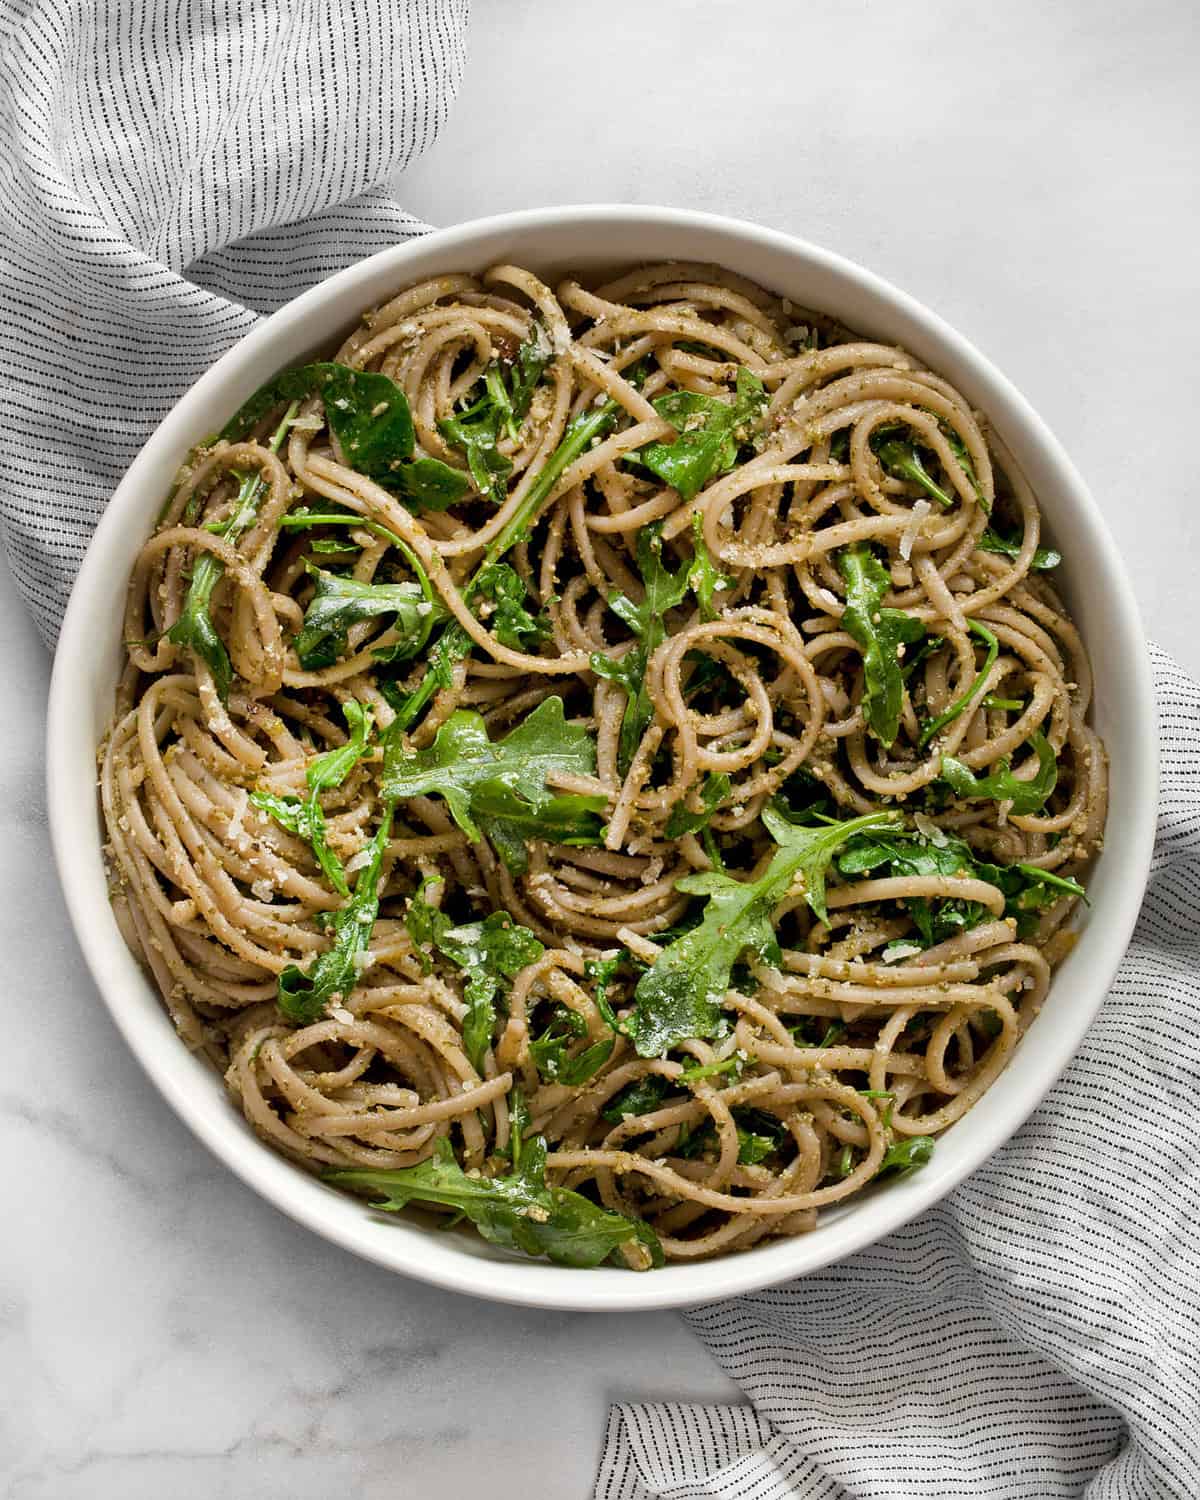 Arugula pasta in a large bowl.